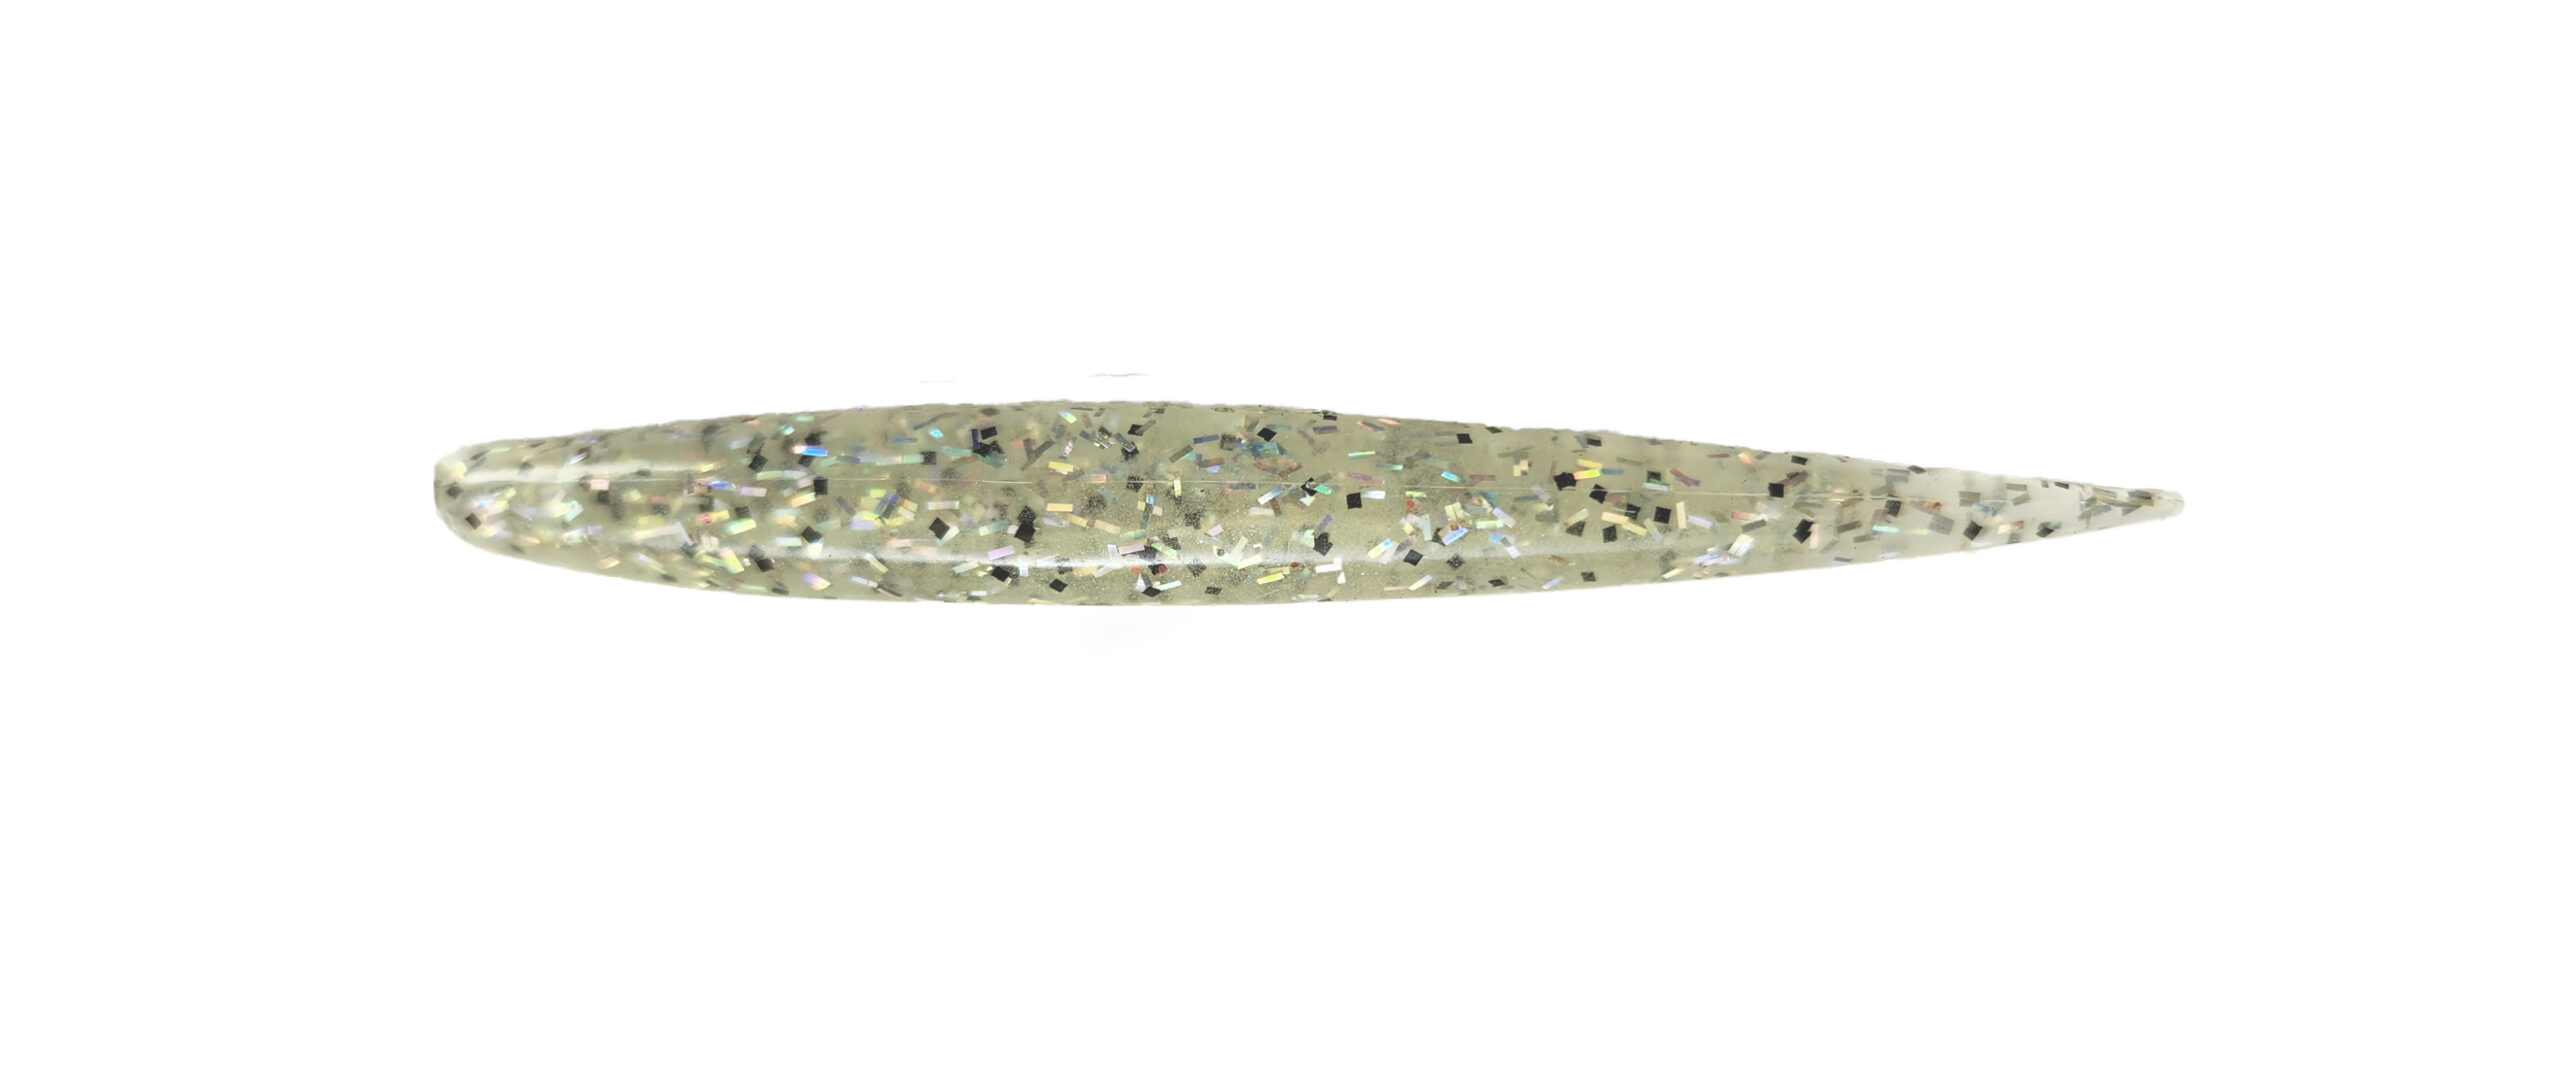 Ghost Shrimp (Glow) Stick Bait – 4.25 inches – Slayer Inc. Lure Company